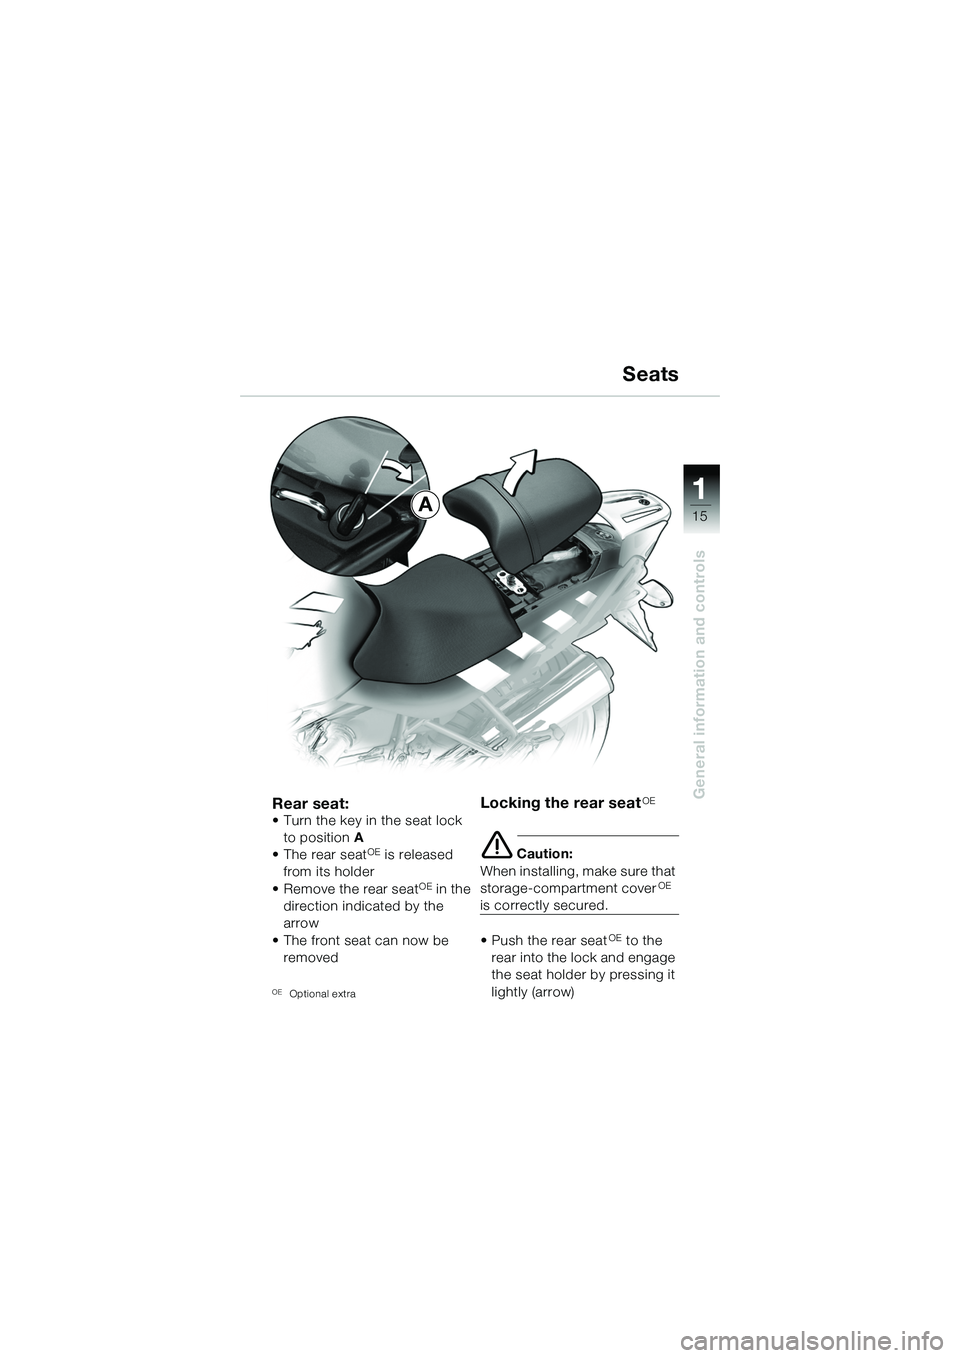 BMW MOTORRAD R 1150 R 2002  Riders Manual (in English) 1
General information and controls
15A
Rear seat:• Turn the key in the seat lock to position  A
•The rear seat
OE is released 
from its holder
• Remove the rear seat
OE in the
direction indicate